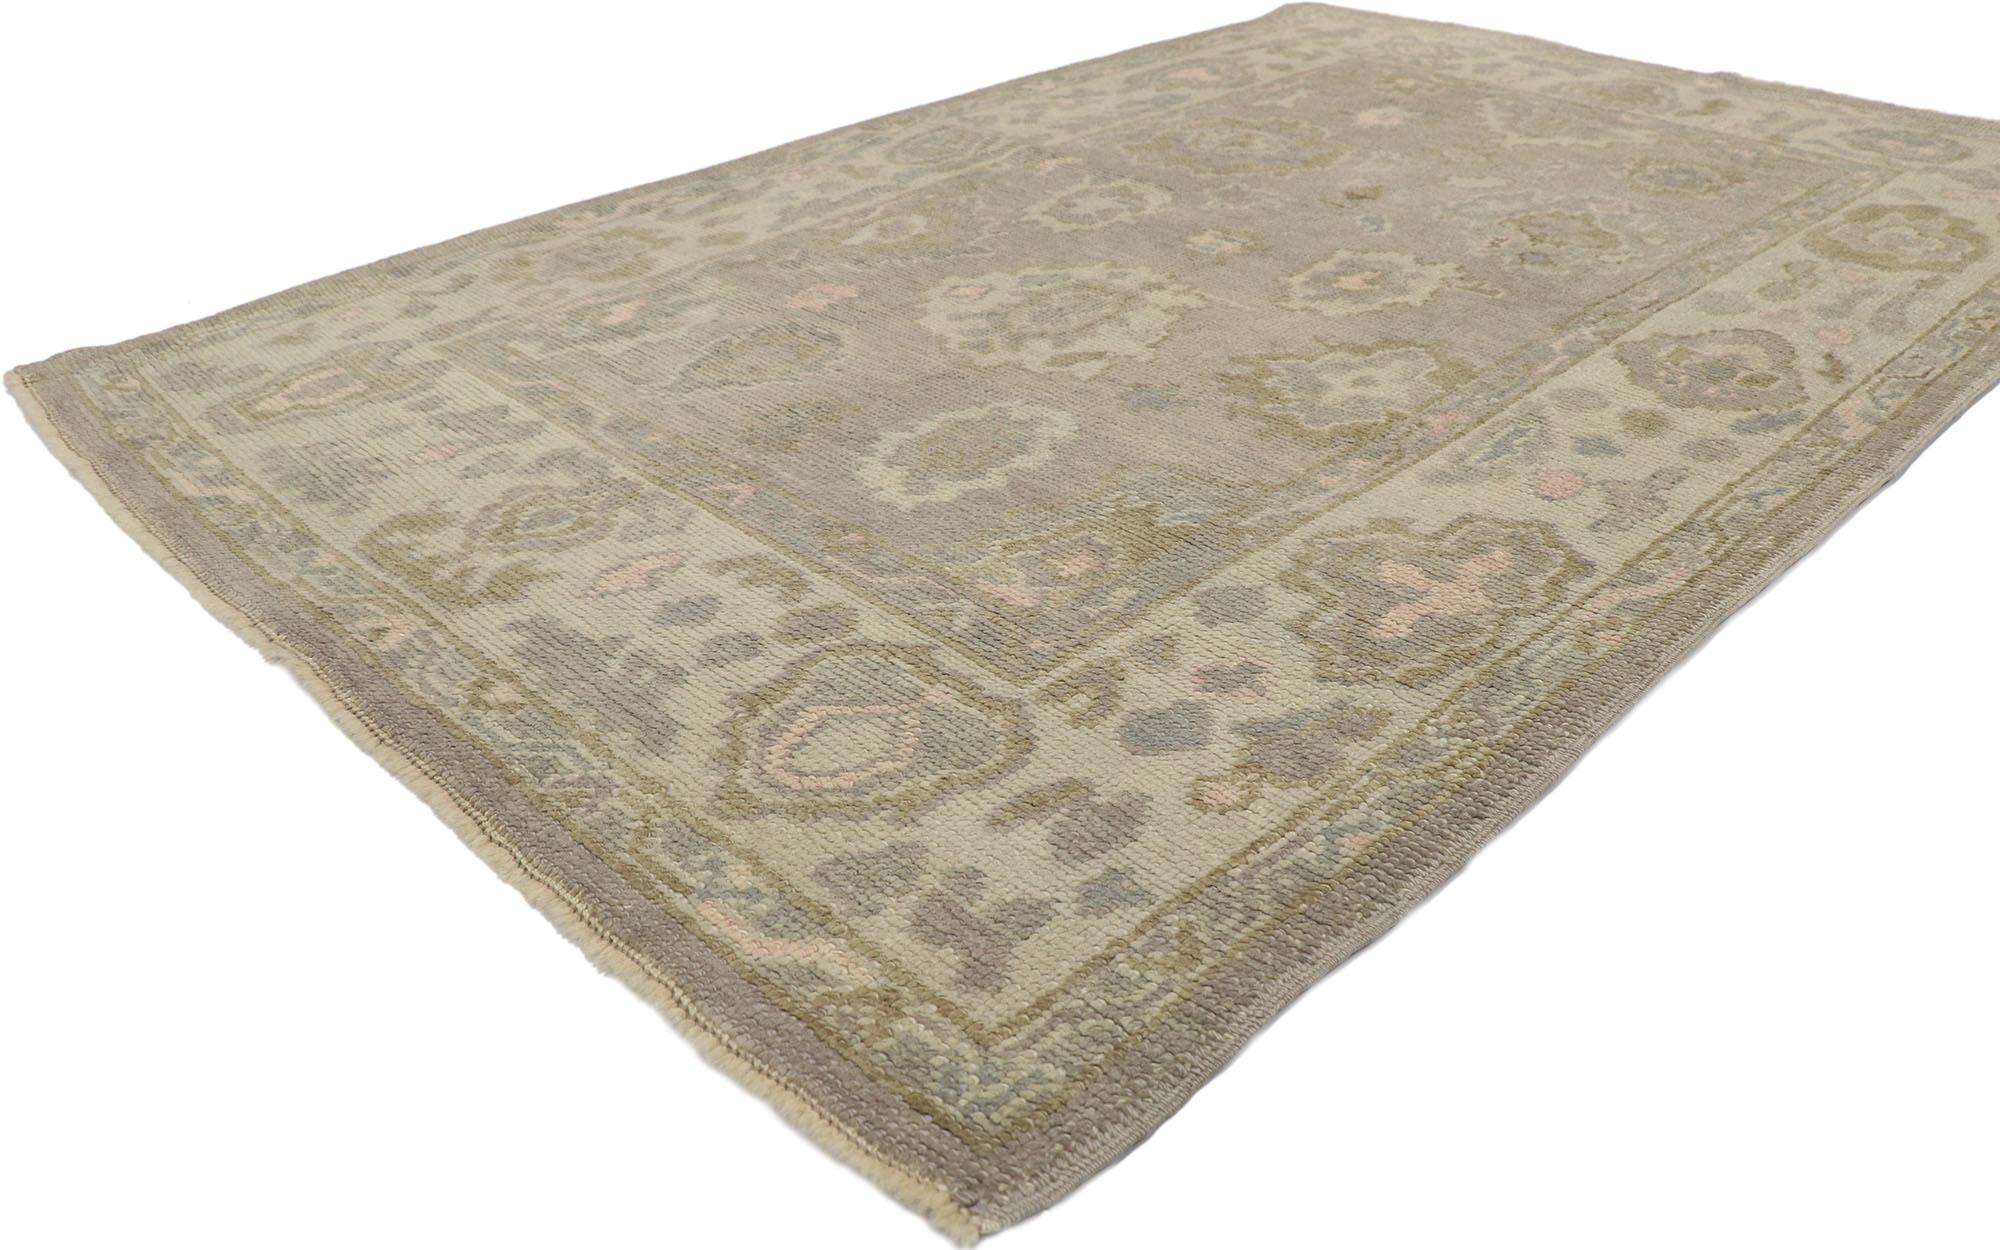 53597 New Contemporary Turkish Oushak Rug with Modern Style 04'05 x 06'10. Softer yet no less striking, this hand knotted wool contemporary Turkish Oushak rug is a captivating vision of woven beauty. The abrashed gray field features an array of